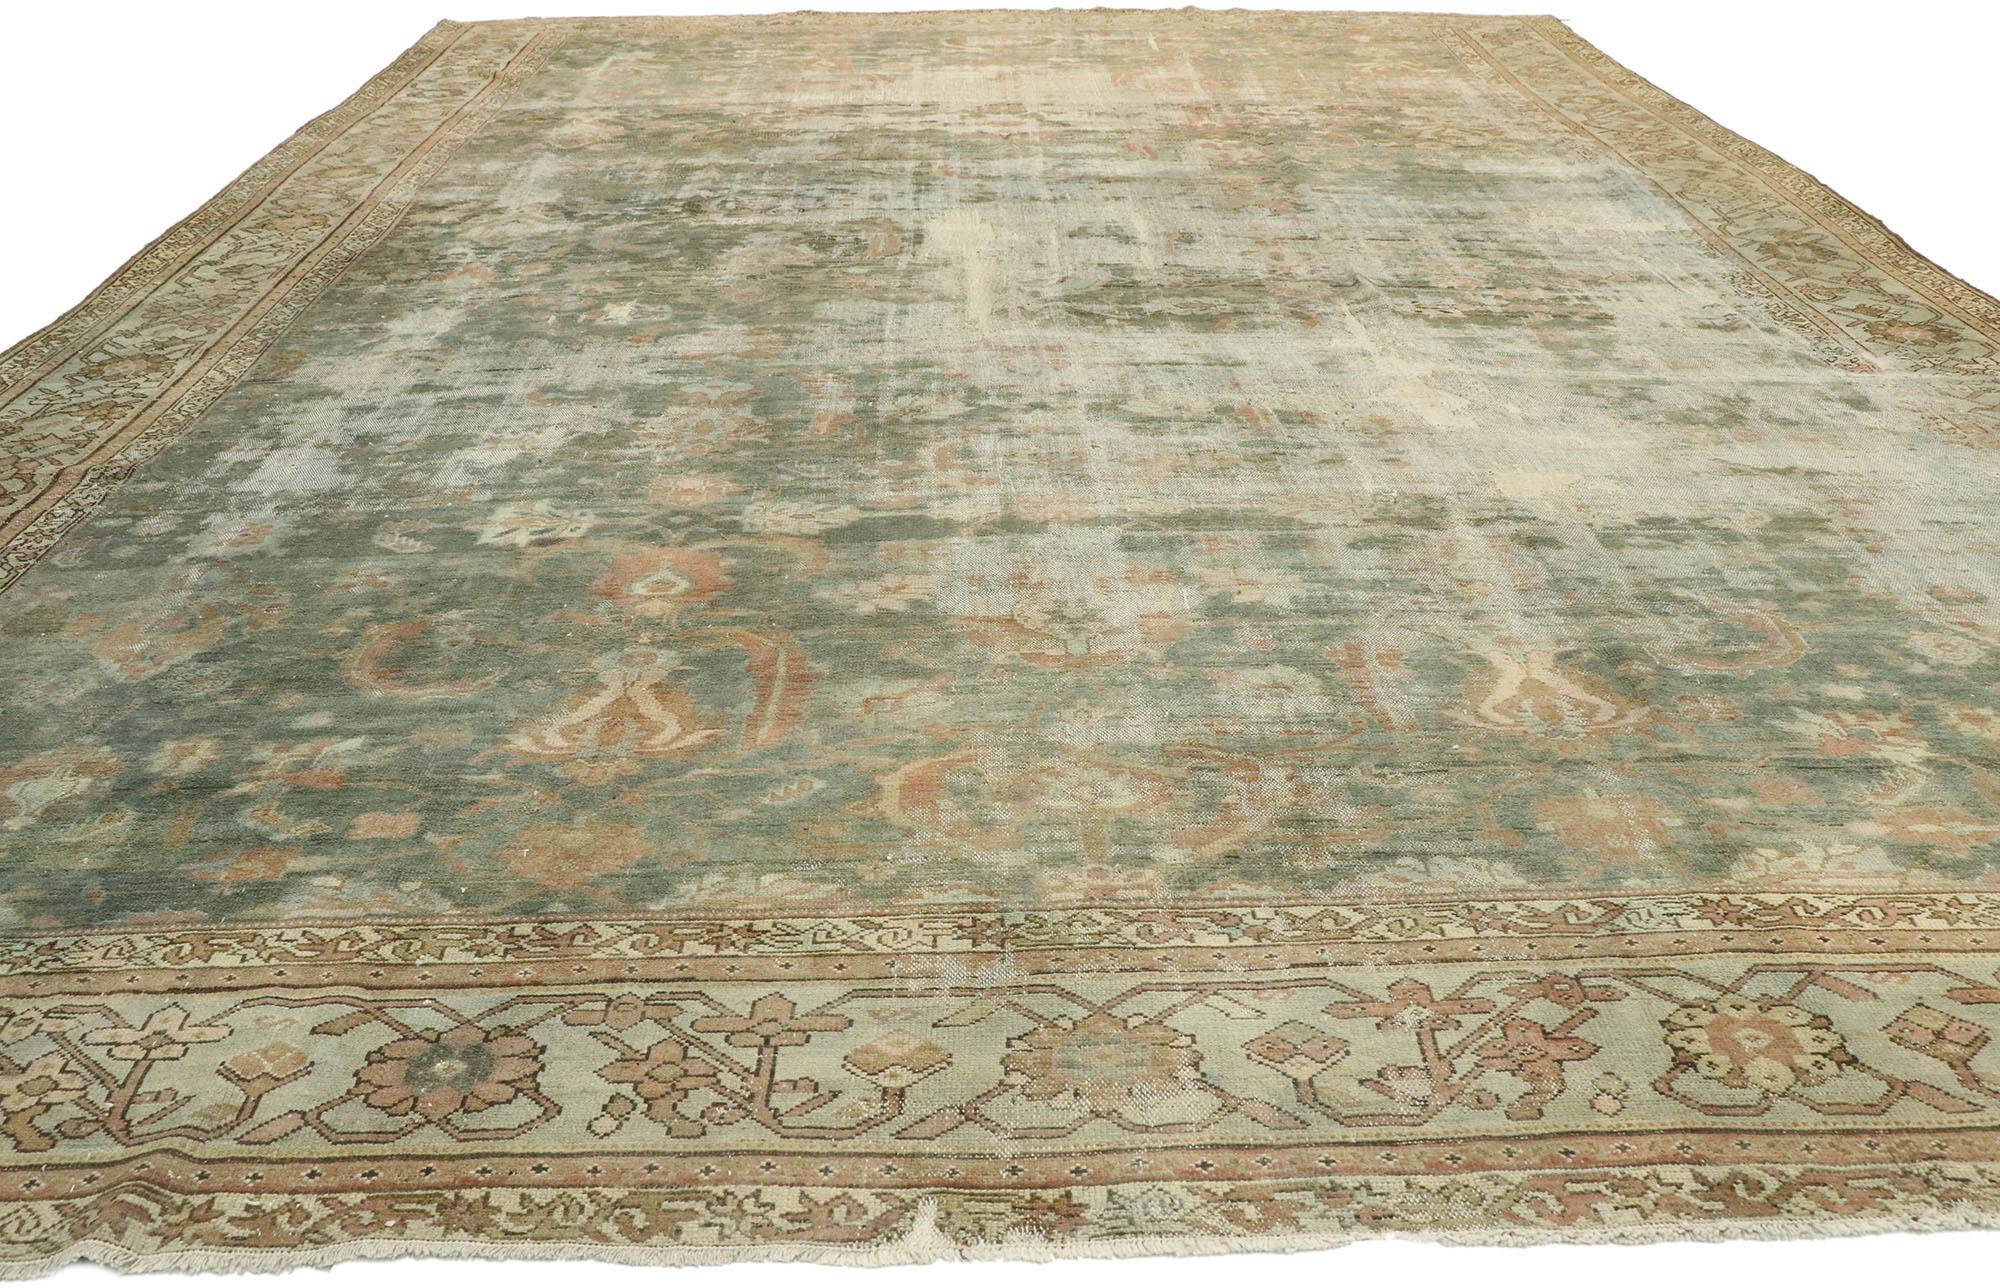 76708 Distressed Antique Persian Malayer rug 10’06 x 13’06. Lovingly timeworn with Gustavian grace, this hand knotted wool distressed antique Persian Malayer rug displays nostalgic charm and inimitable warmth. The weathered features features an